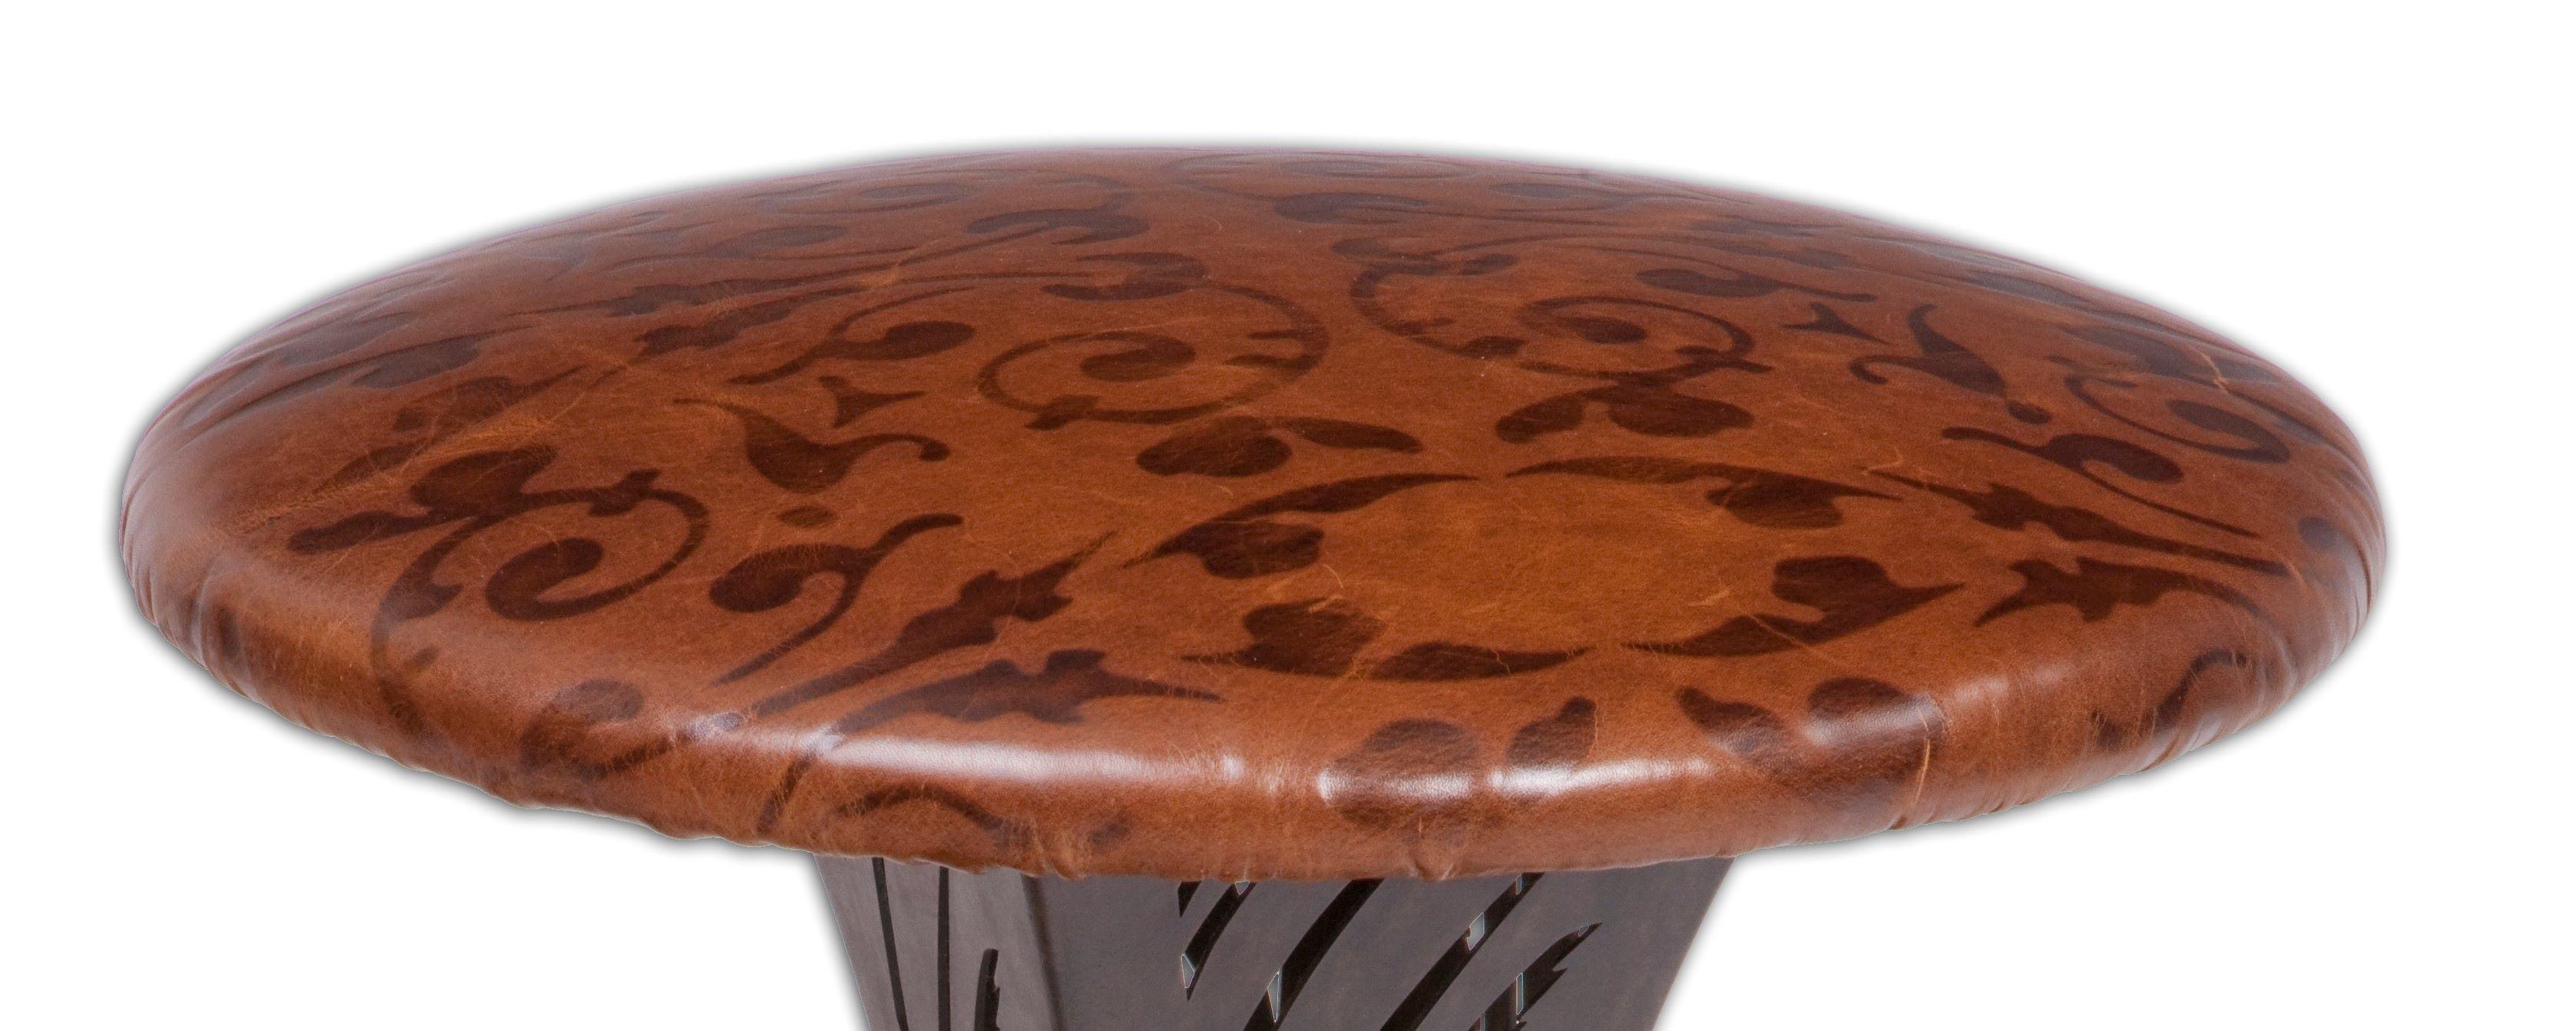 Steel and leather stool
Versatile piece that can be customized with a variety of metals including stainless steel, blackened steel, bronze. COL or COM
As shown 18 x 18 x 20 high, dimensions are customizable.